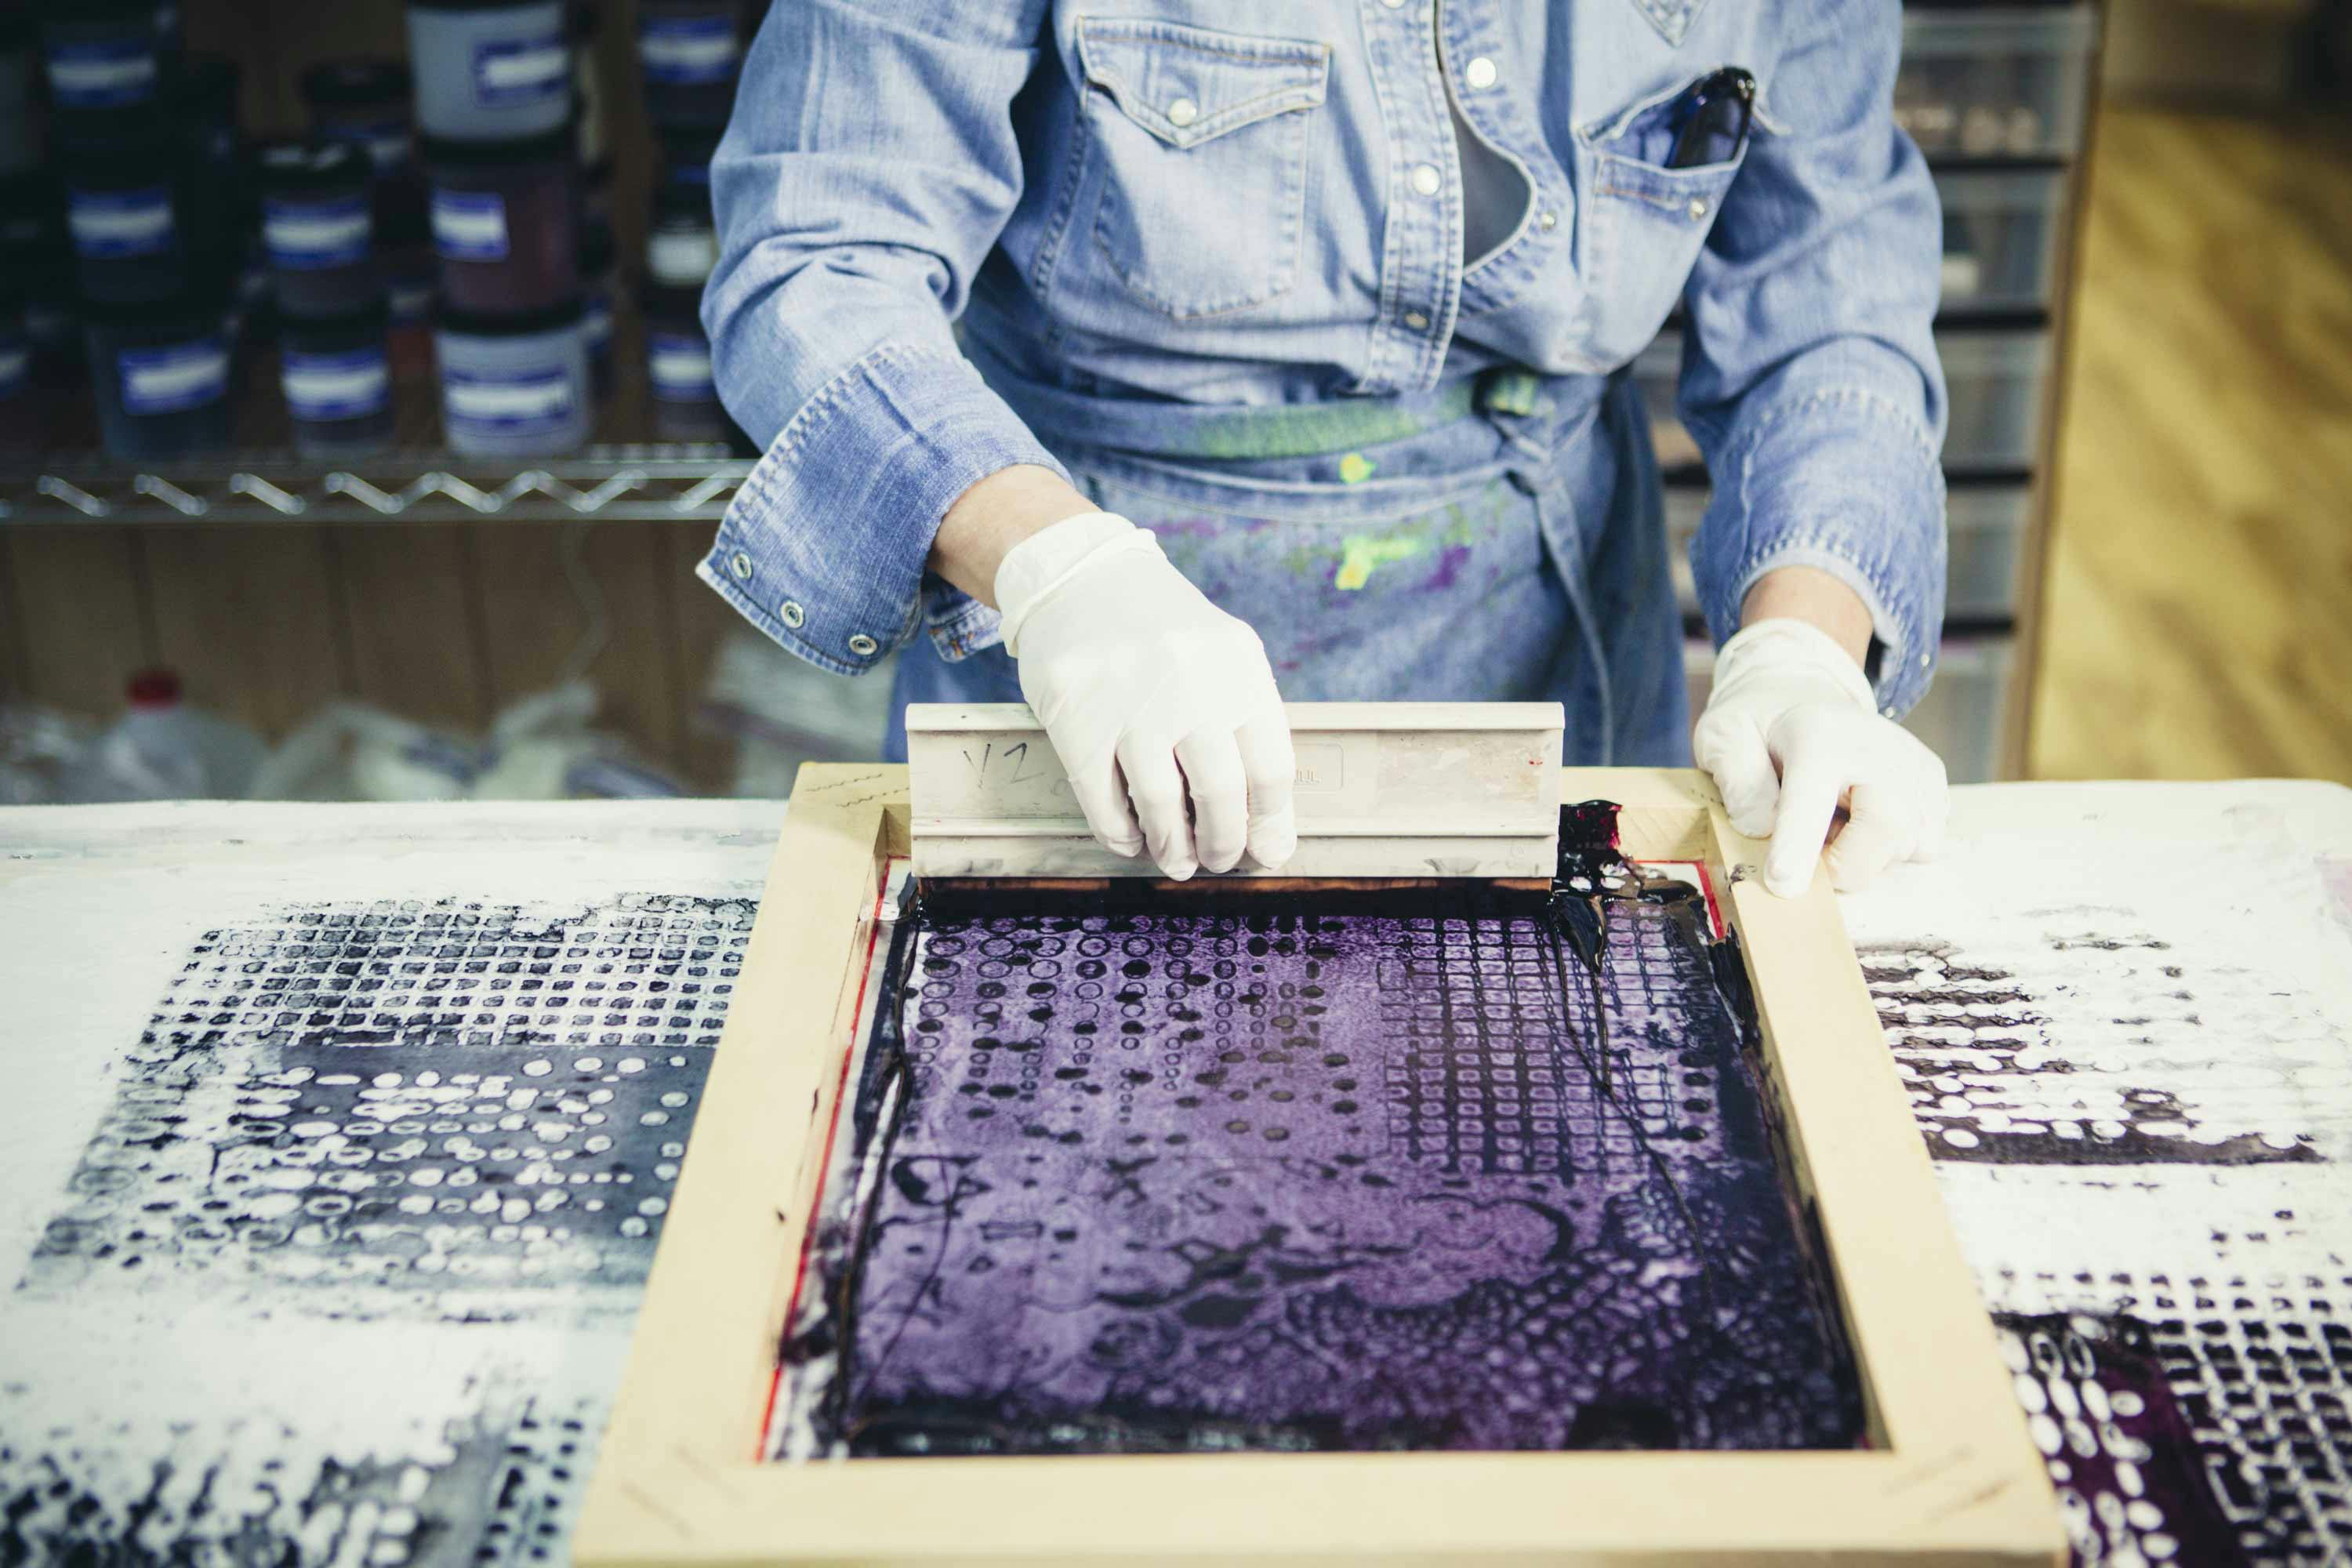  person using a squeegee and silk screen to print textiles